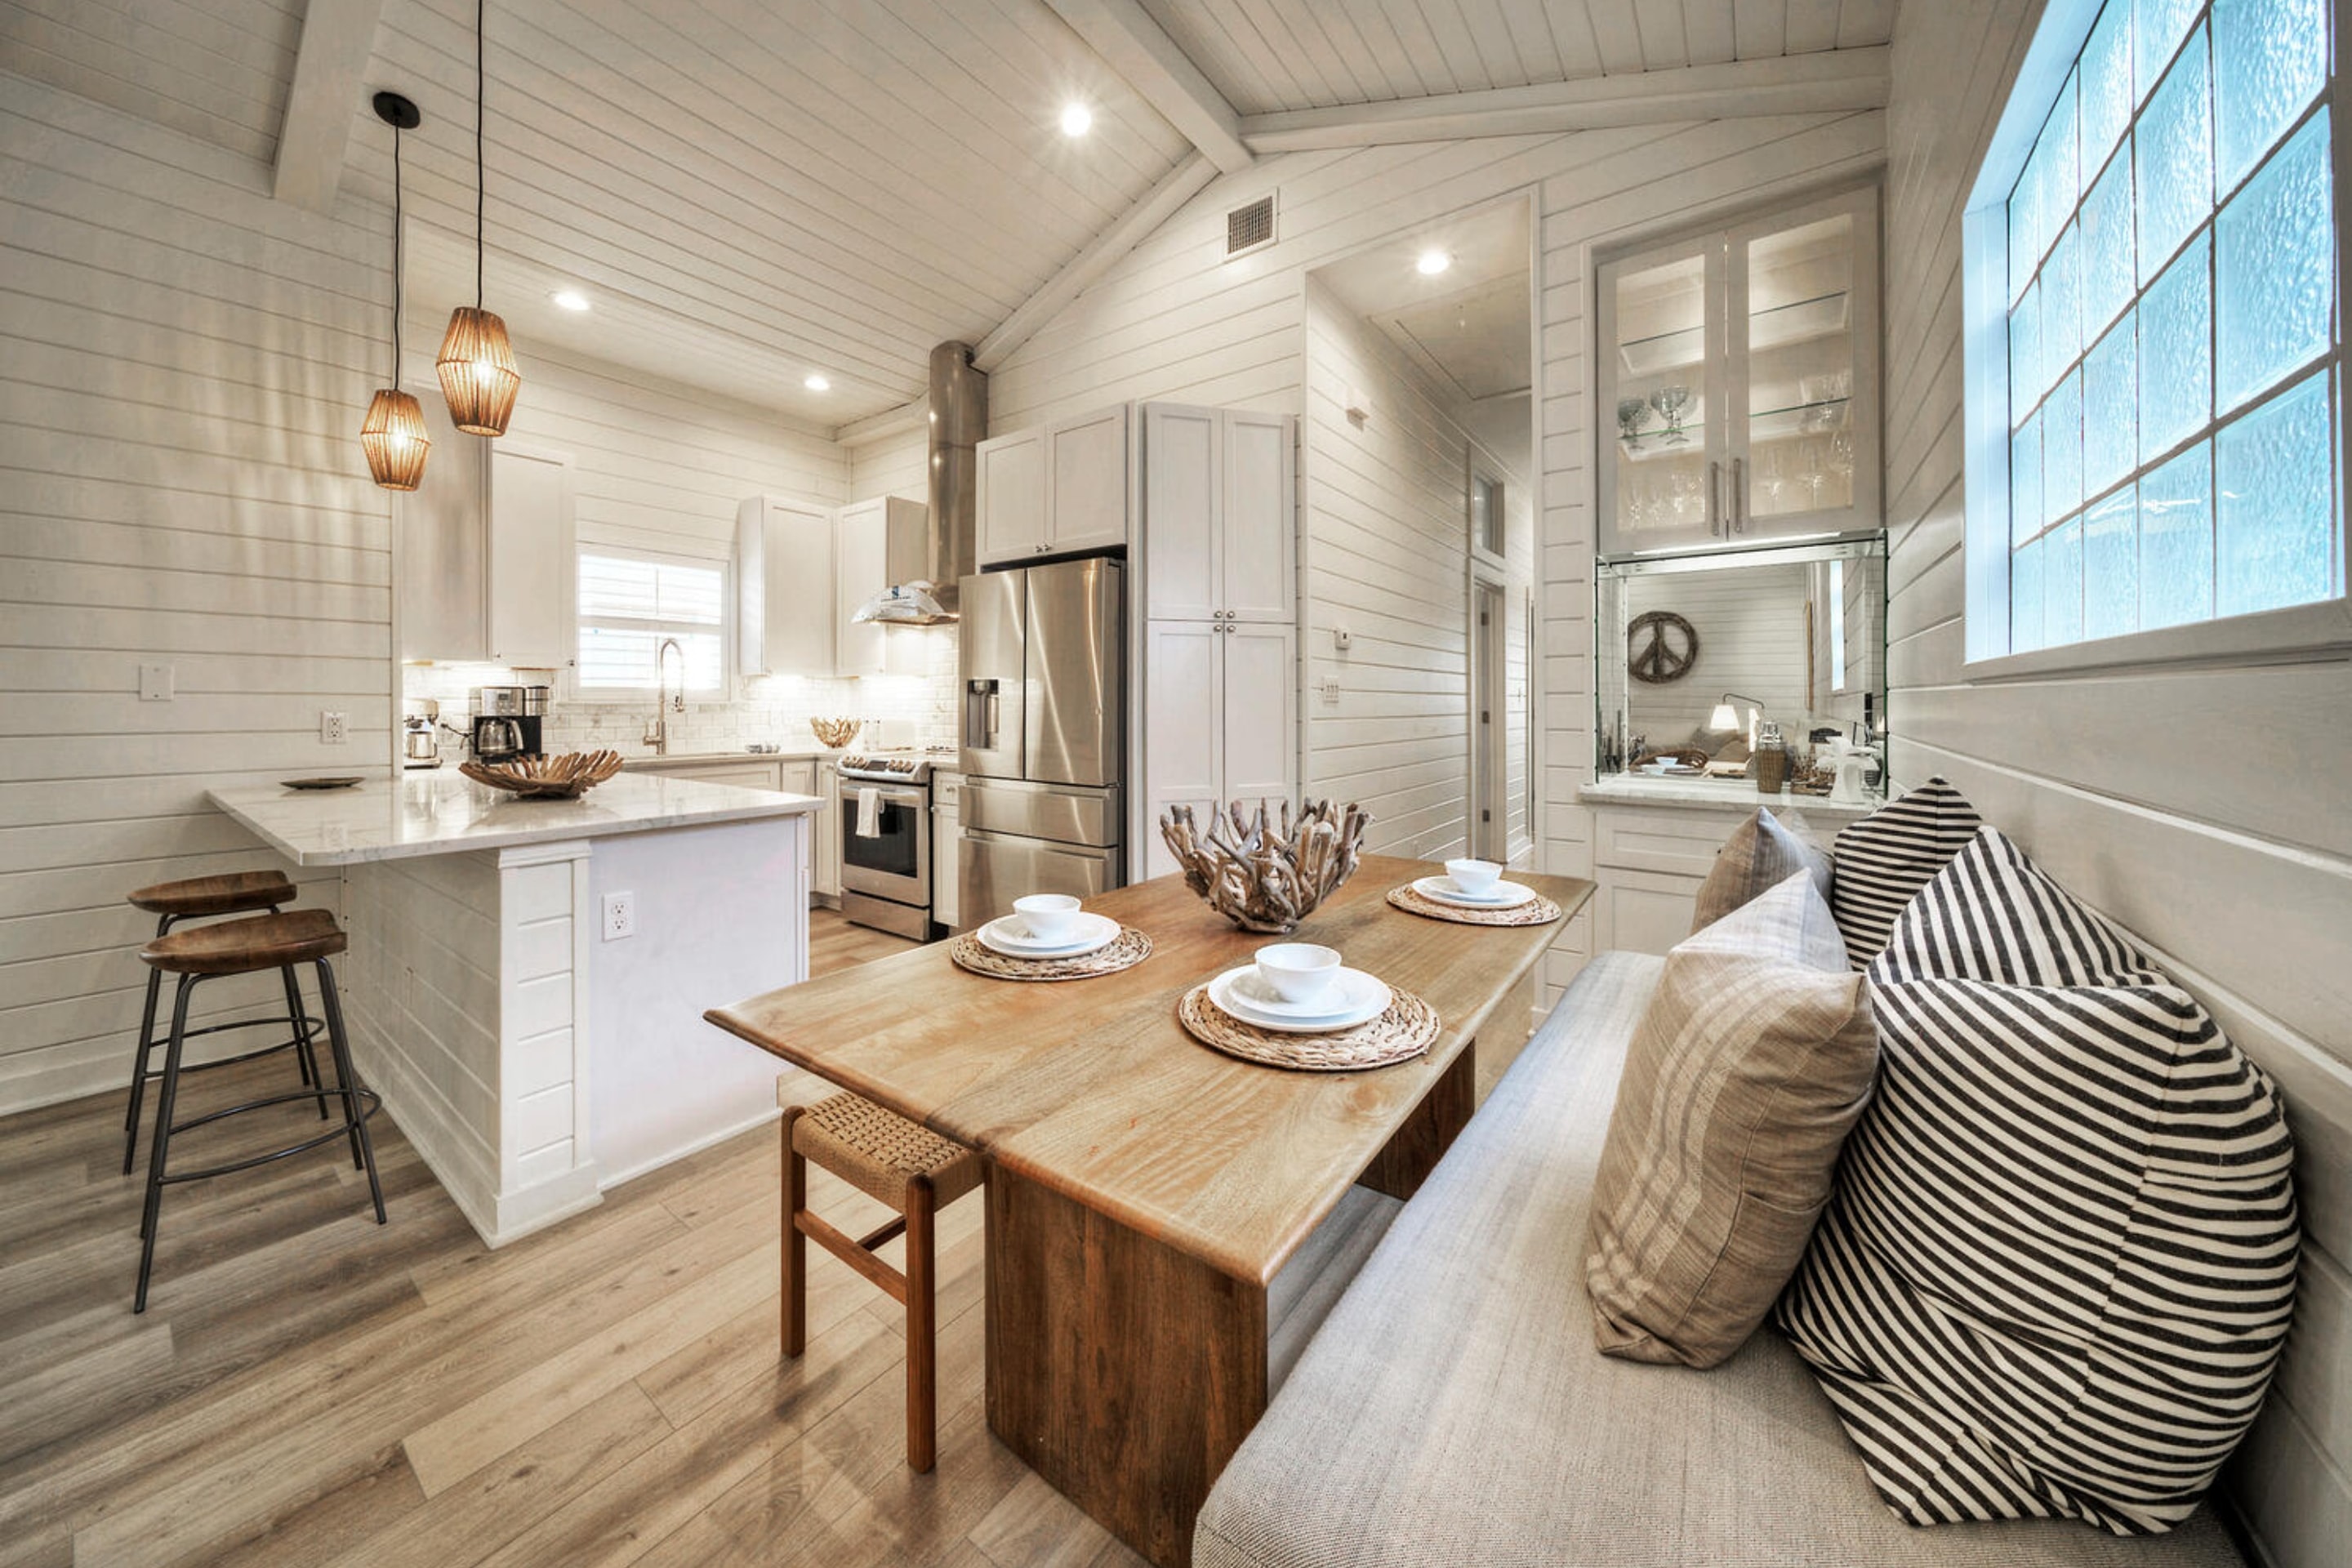 Elevating culinary artistry with a modern touch of white and rustic wood.